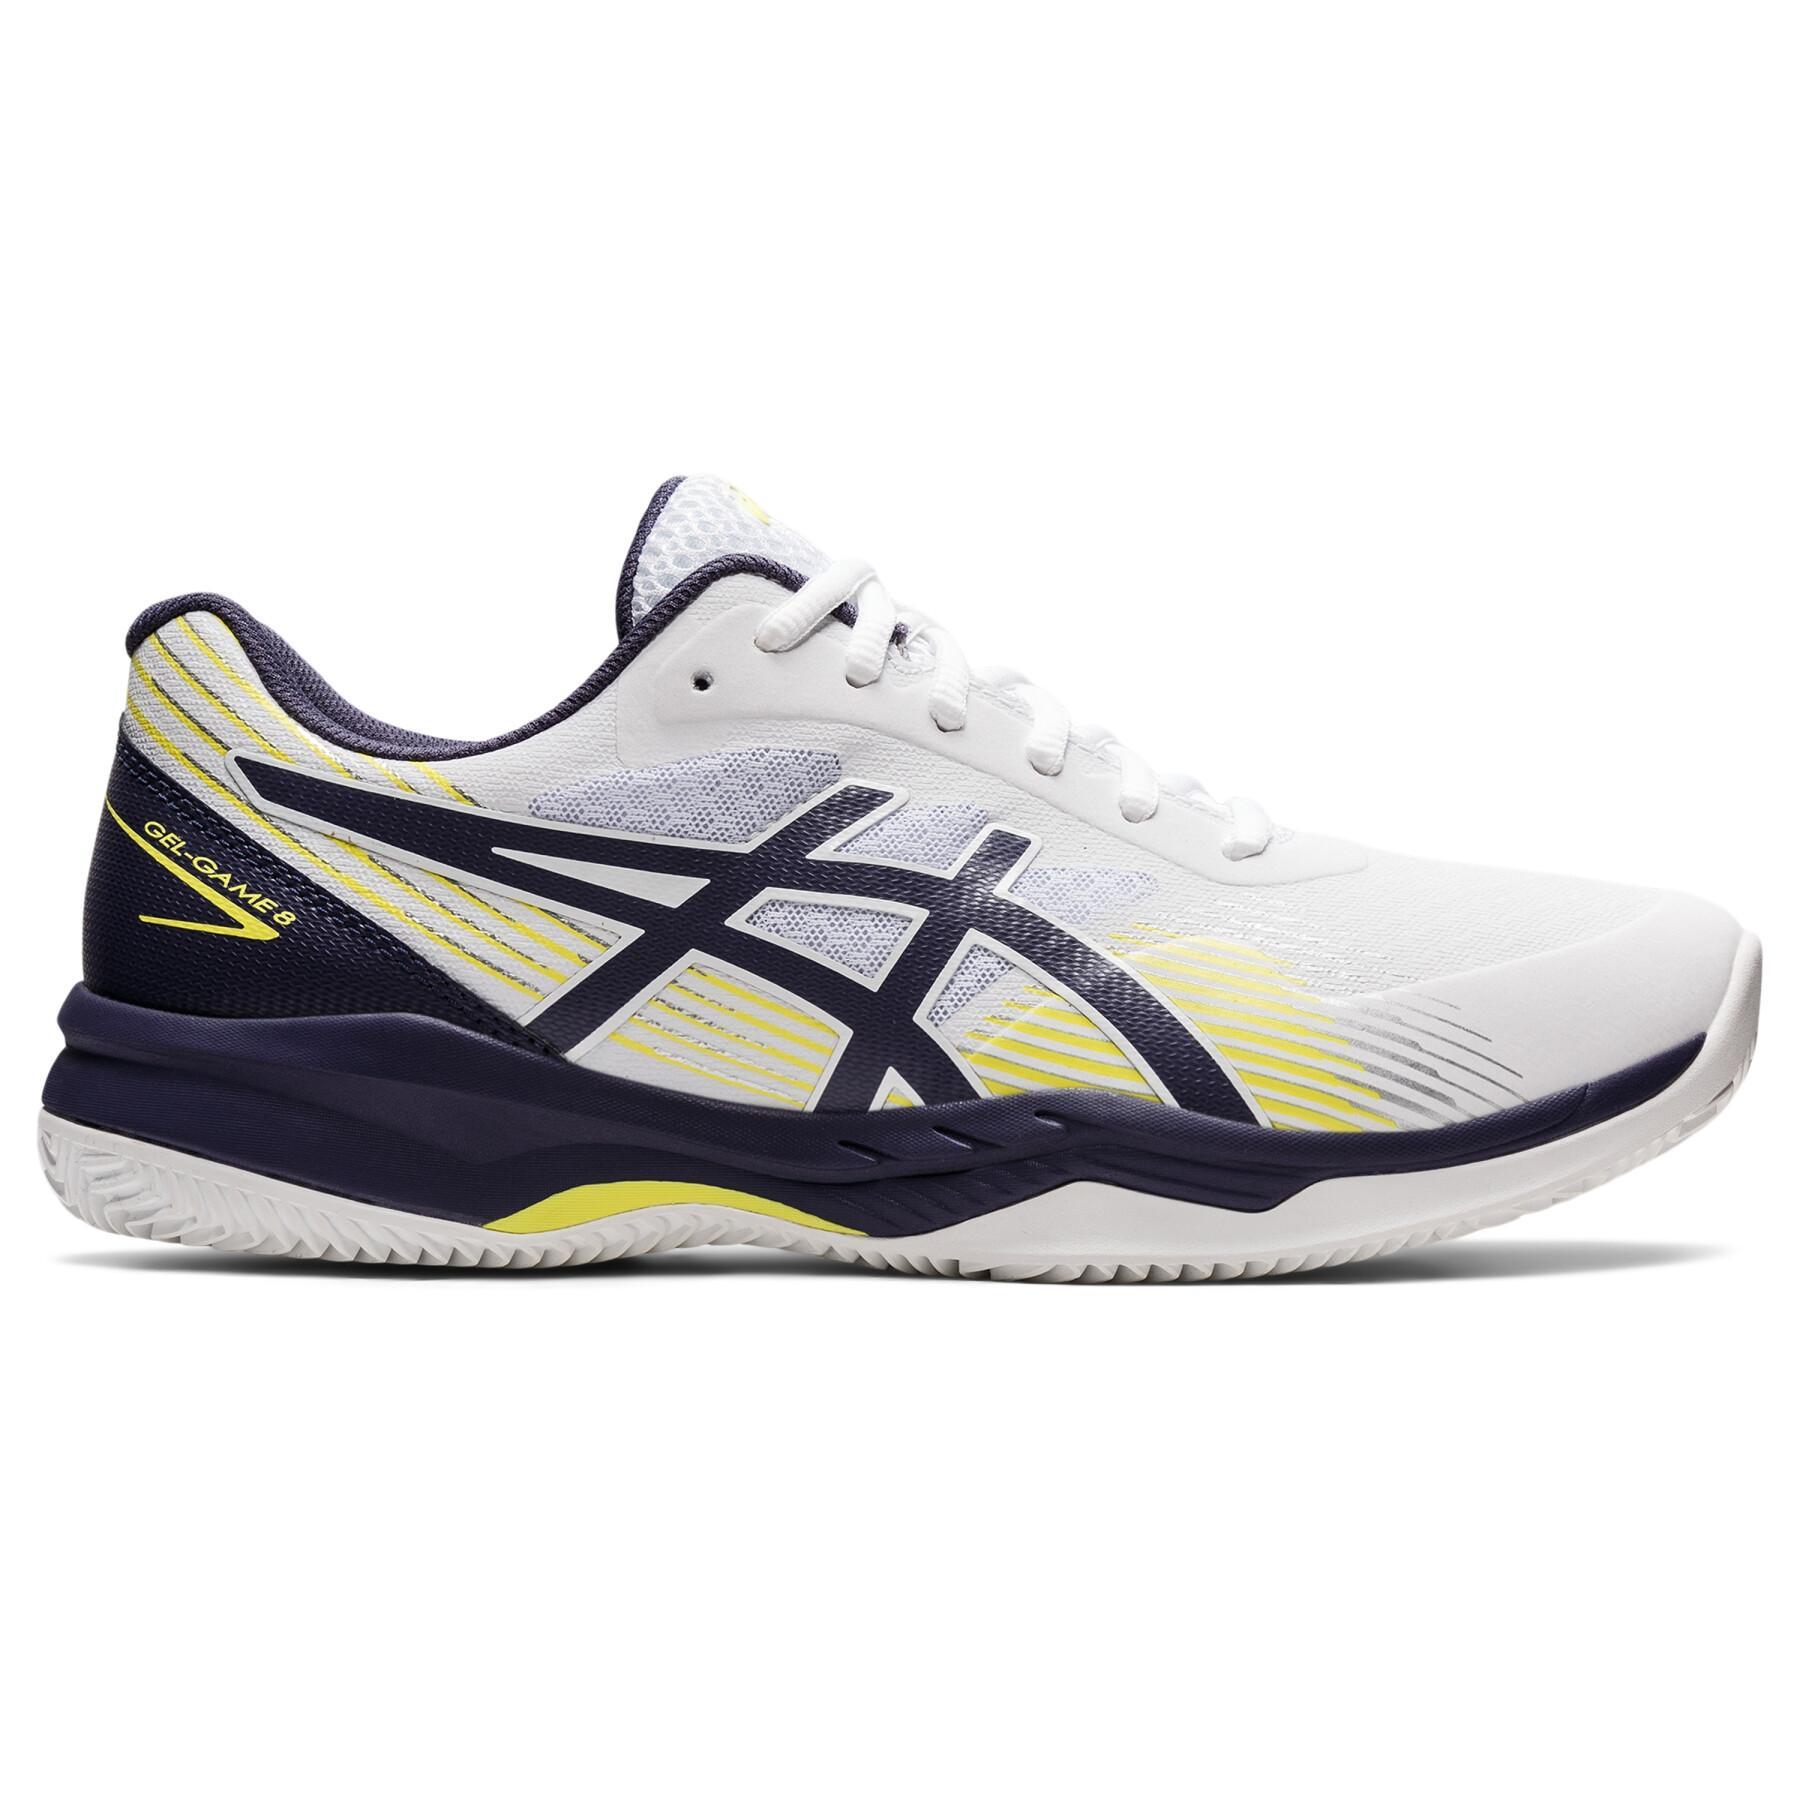 Tennis shoes Asics Gel-Game 8 Clay/oc